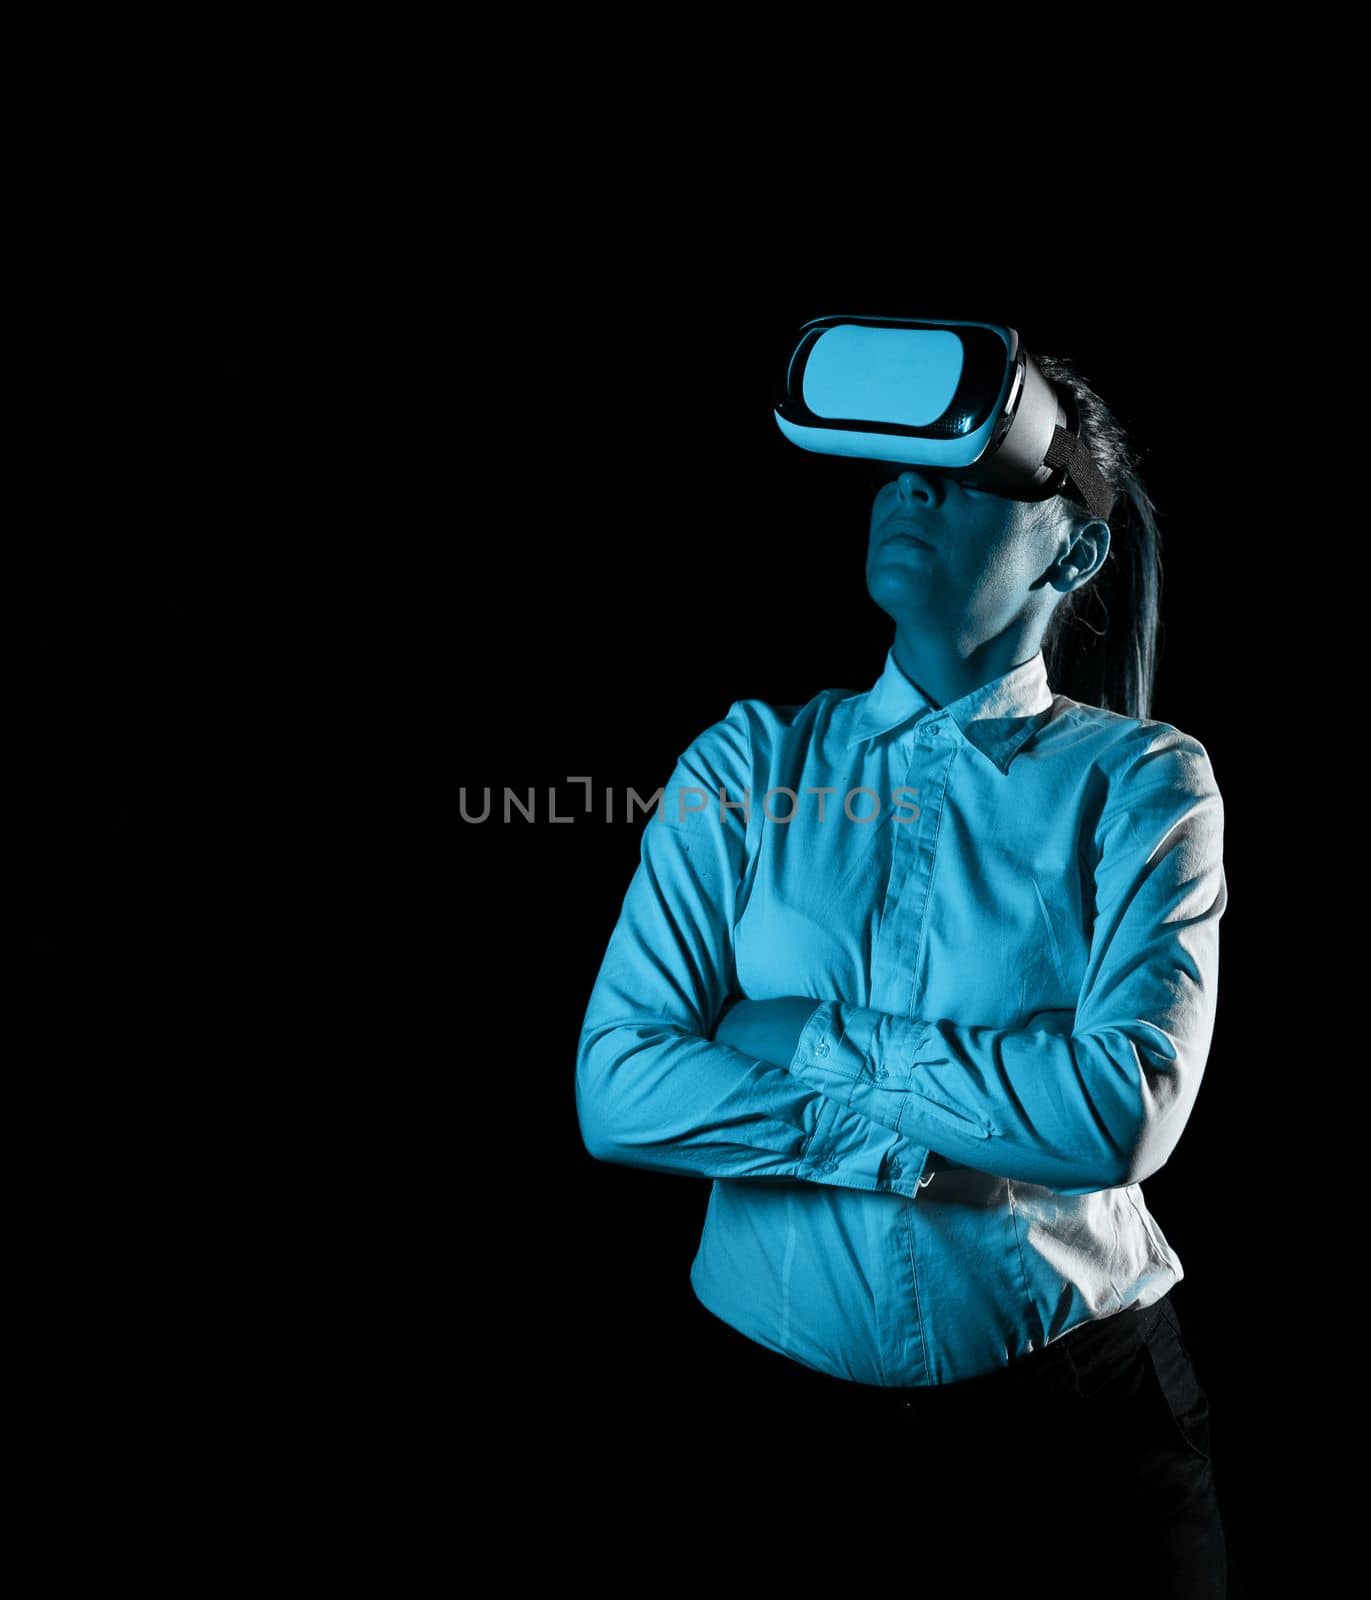 Woman Wearing Vr Glasses And Looking On Important Messages.